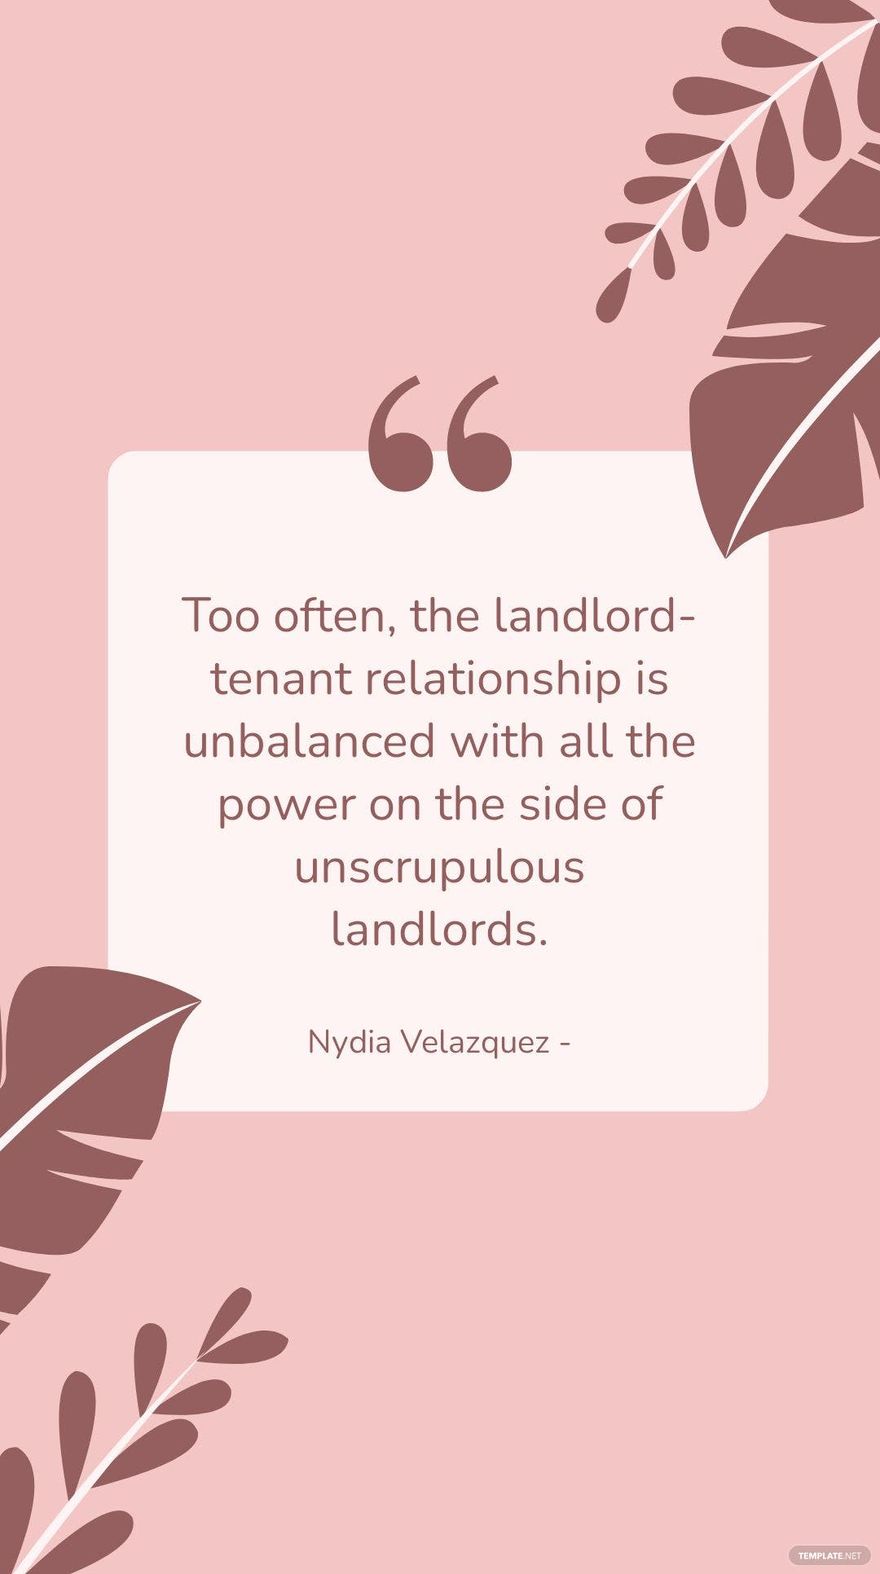 Nydia Velazquez - Too often, the landlord-tenant relationship is unbalanced with all the power on the side of unscrupulous landlords.